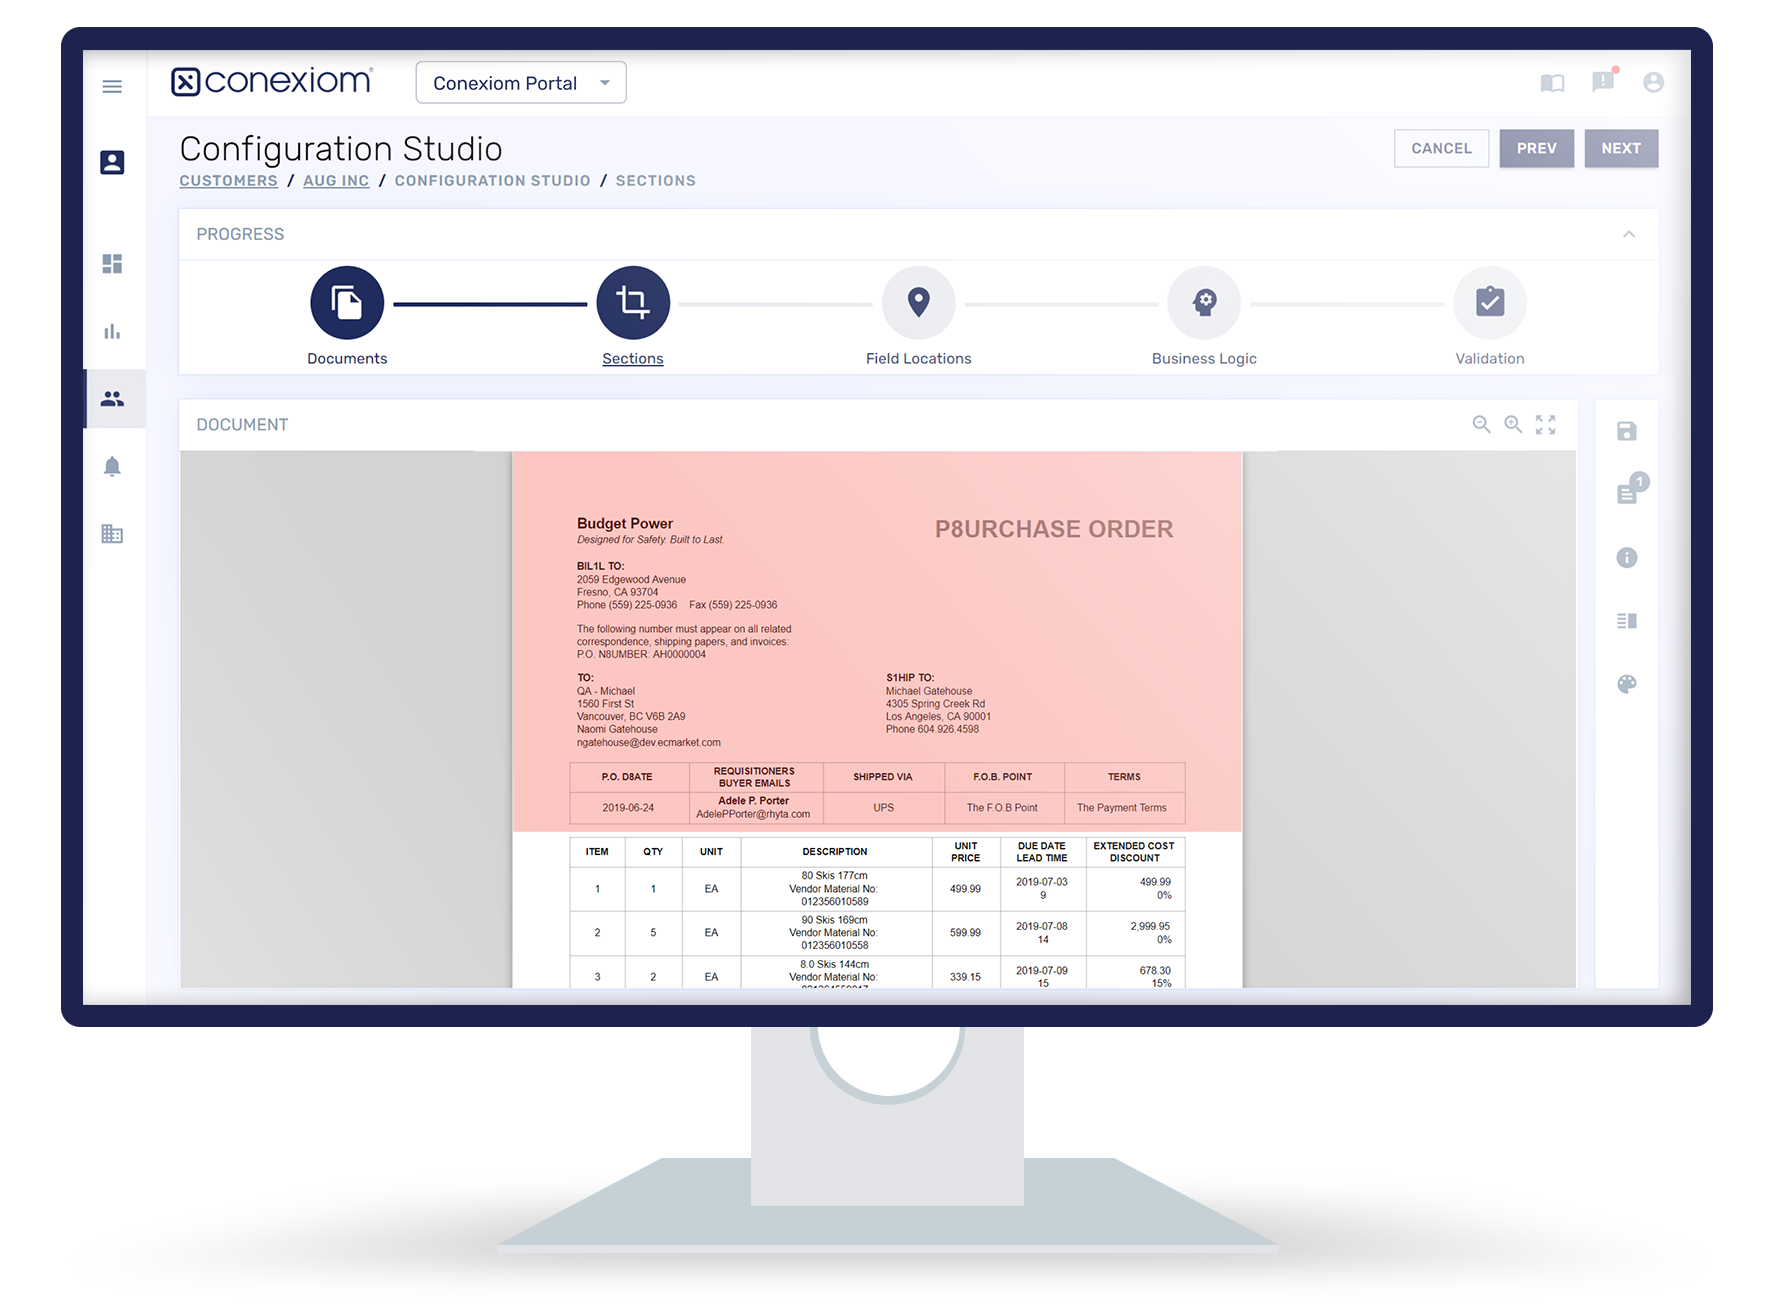 Conexiom Software - Configuration Studio - Manage configurations for the customers and vendors on The Conexiom Platform in the Configuration Studio.